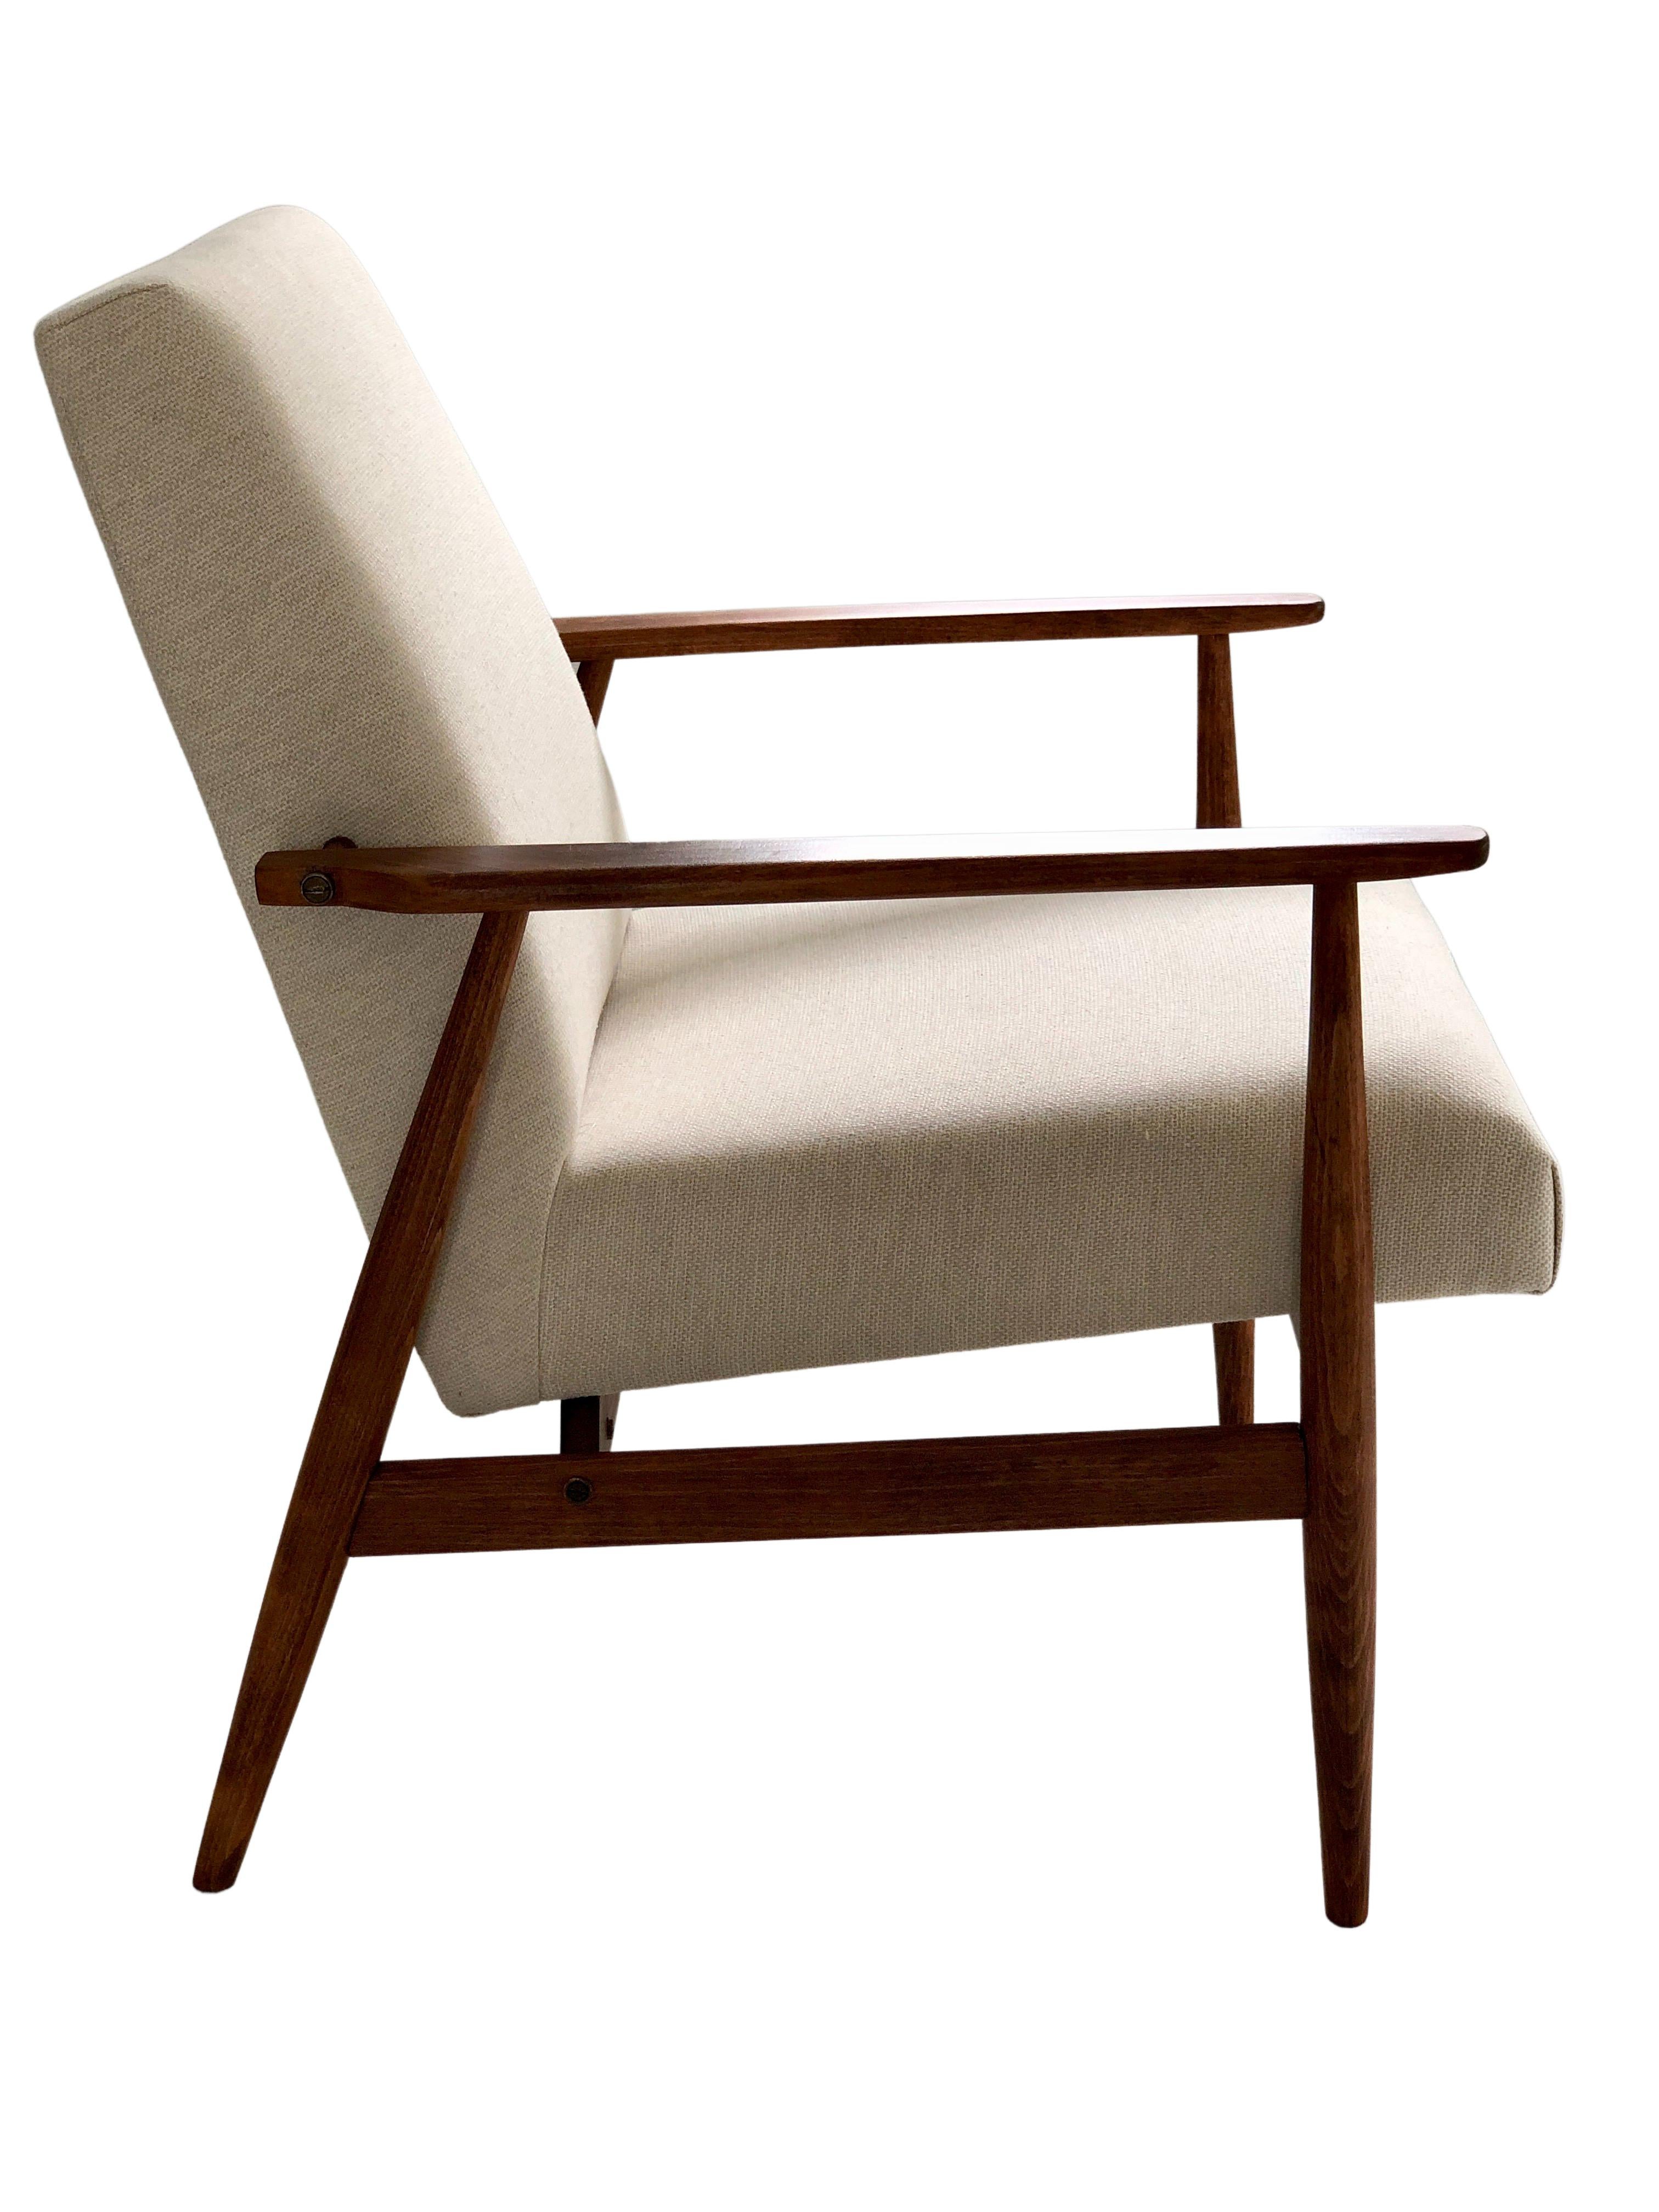 20th Century Mid Century Armchair by Henryk Lis in Beige, Europe, 1960s, For Sale